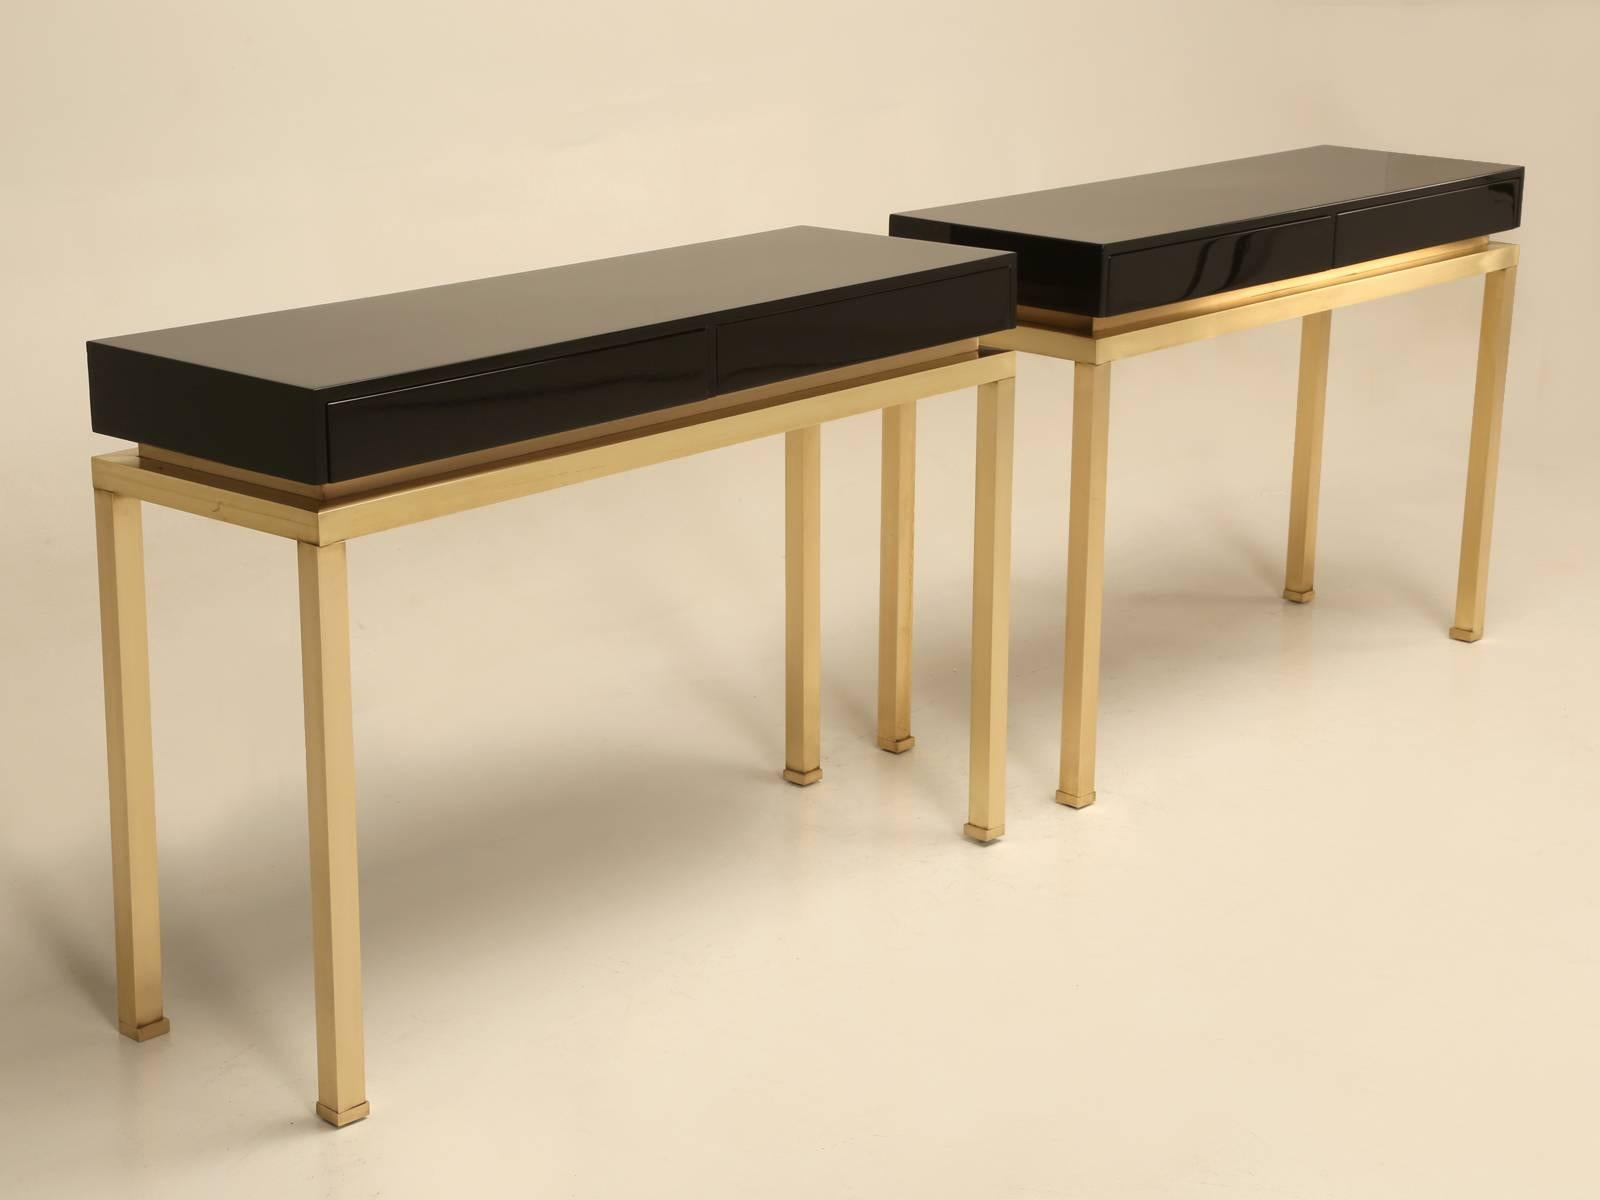 Designed by Guy Lefevre for Maison Jansen and probably produced in the early 1970s. Unusual for us to find a pair and especially so in a black lacquer finish, with no paint chips or surface scratches. The brushed solid brass bases are very nice and